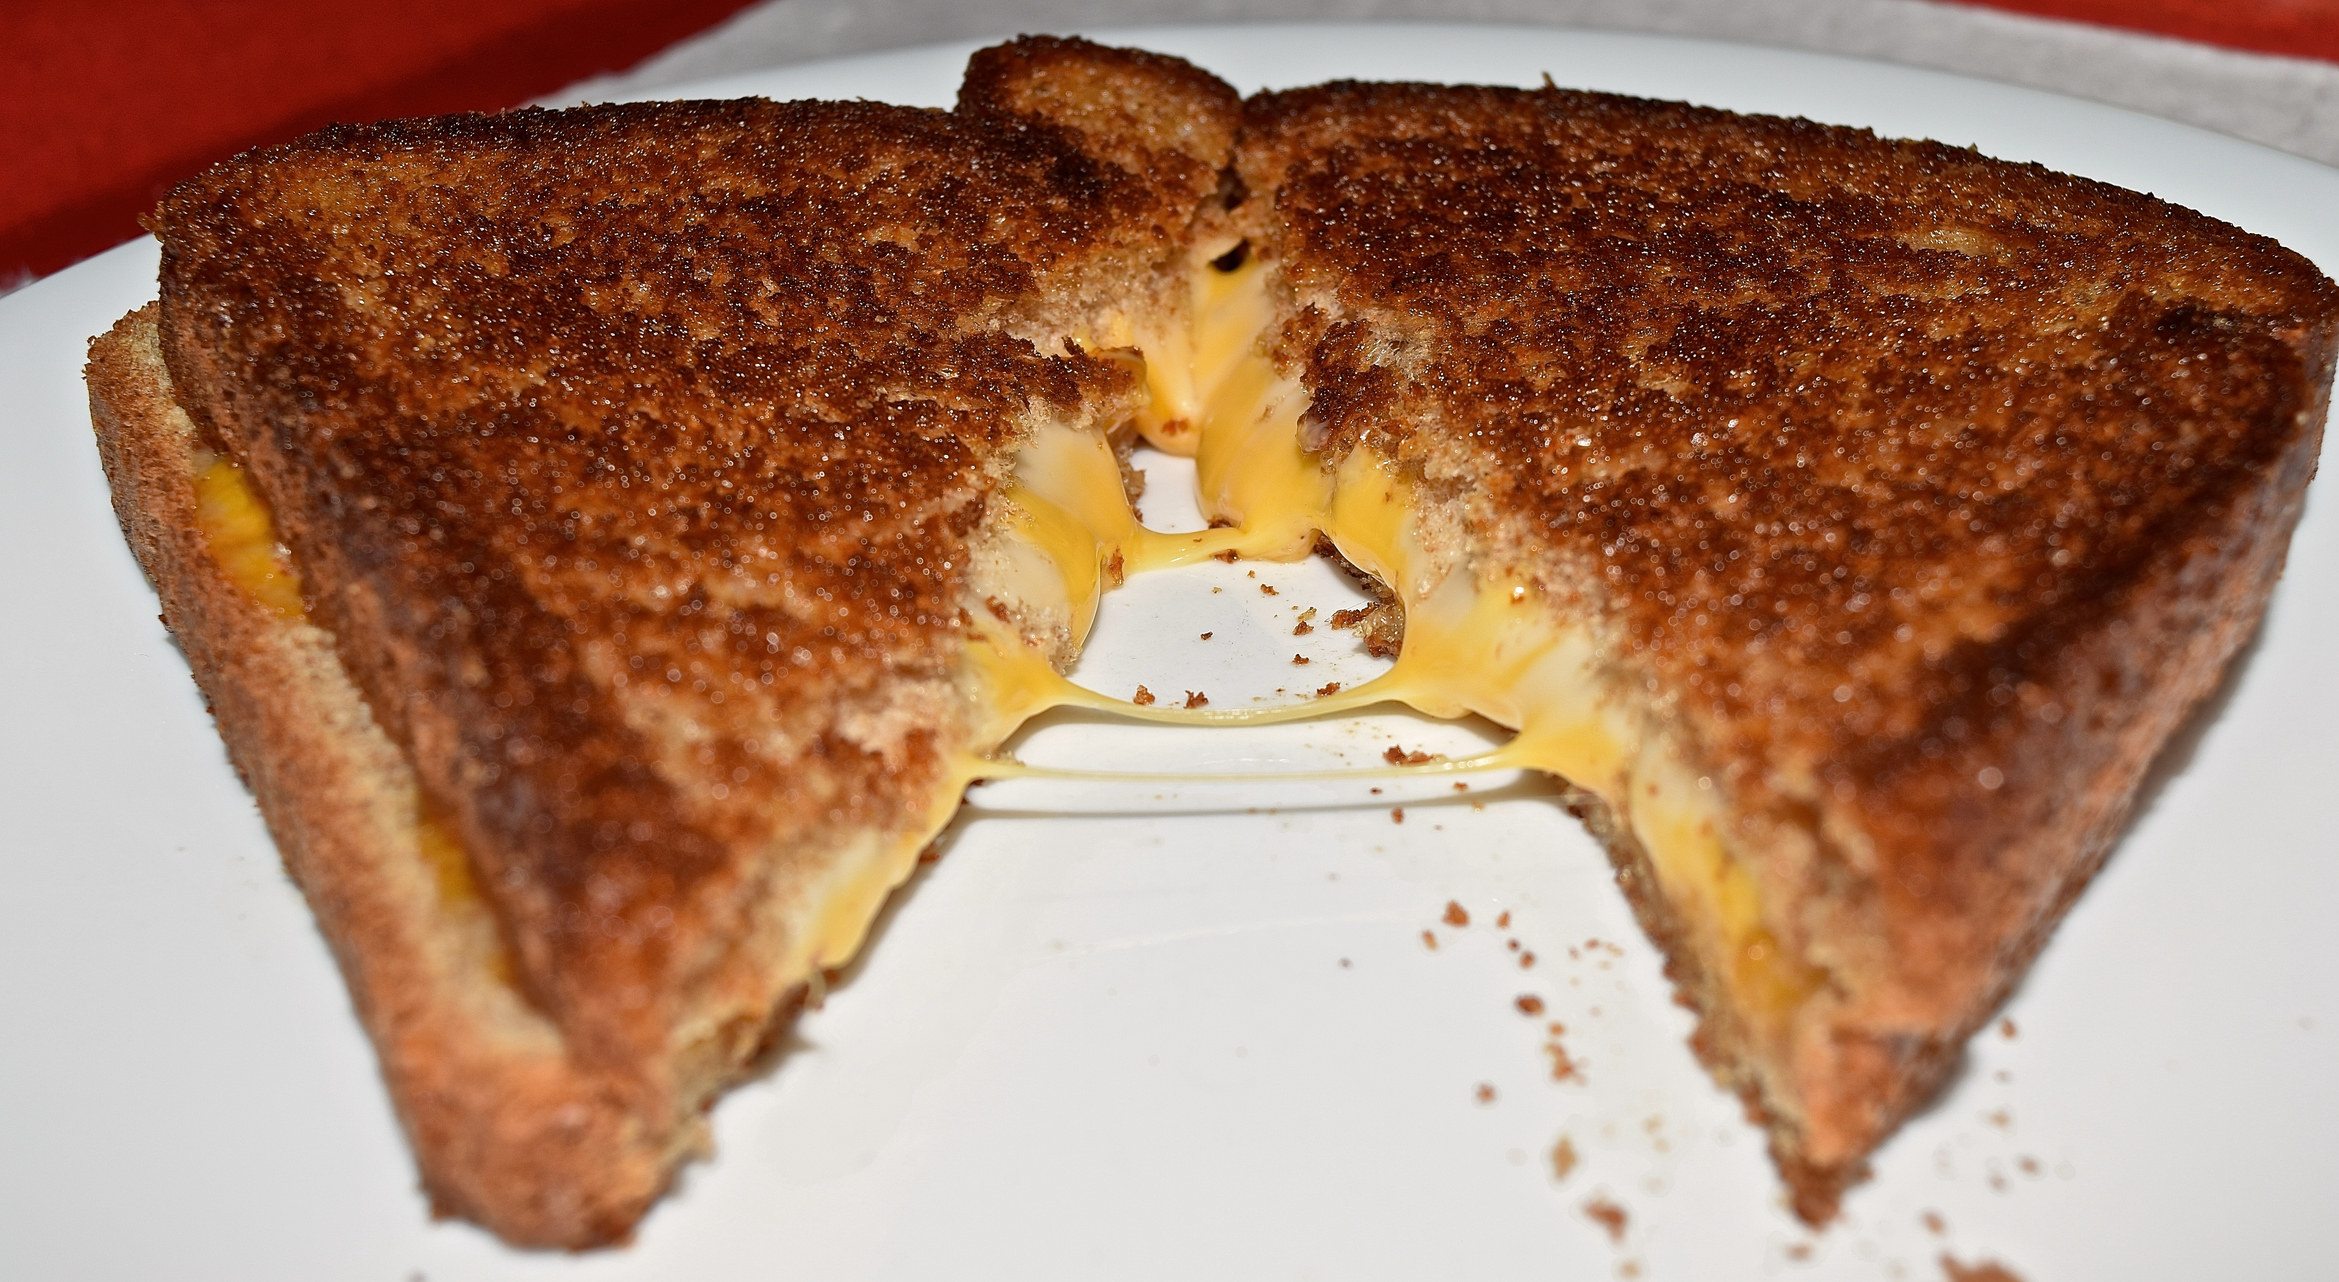 A grilled cheese sandwich cut into triangles